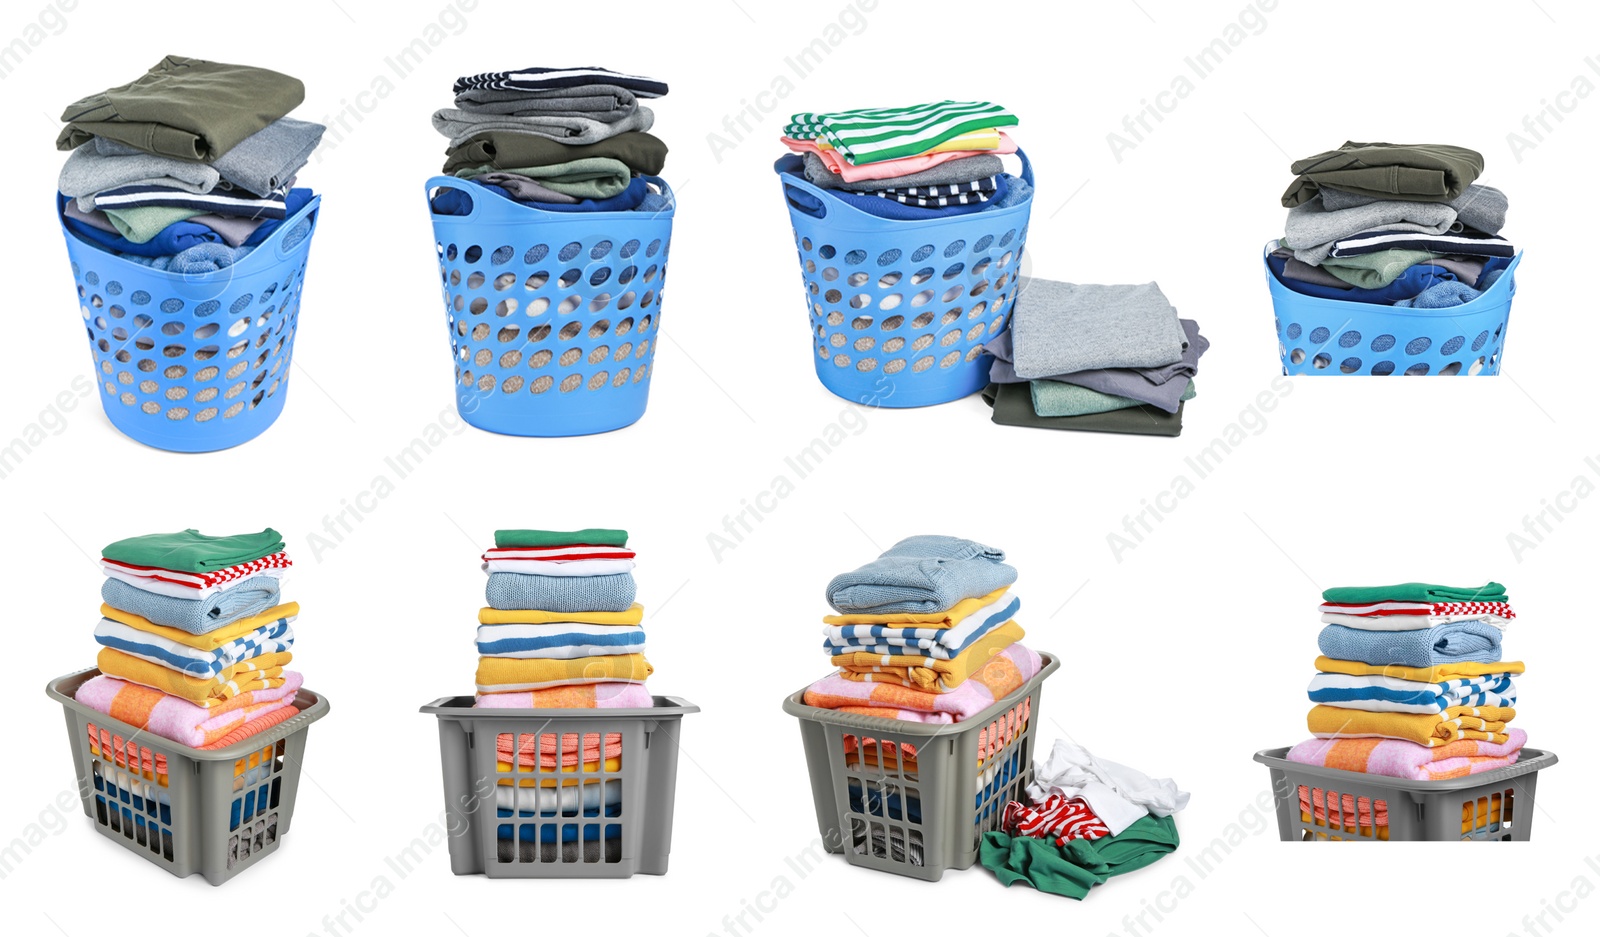 Image of Collage with laundry baskets full of clothes on white background, views from different sides